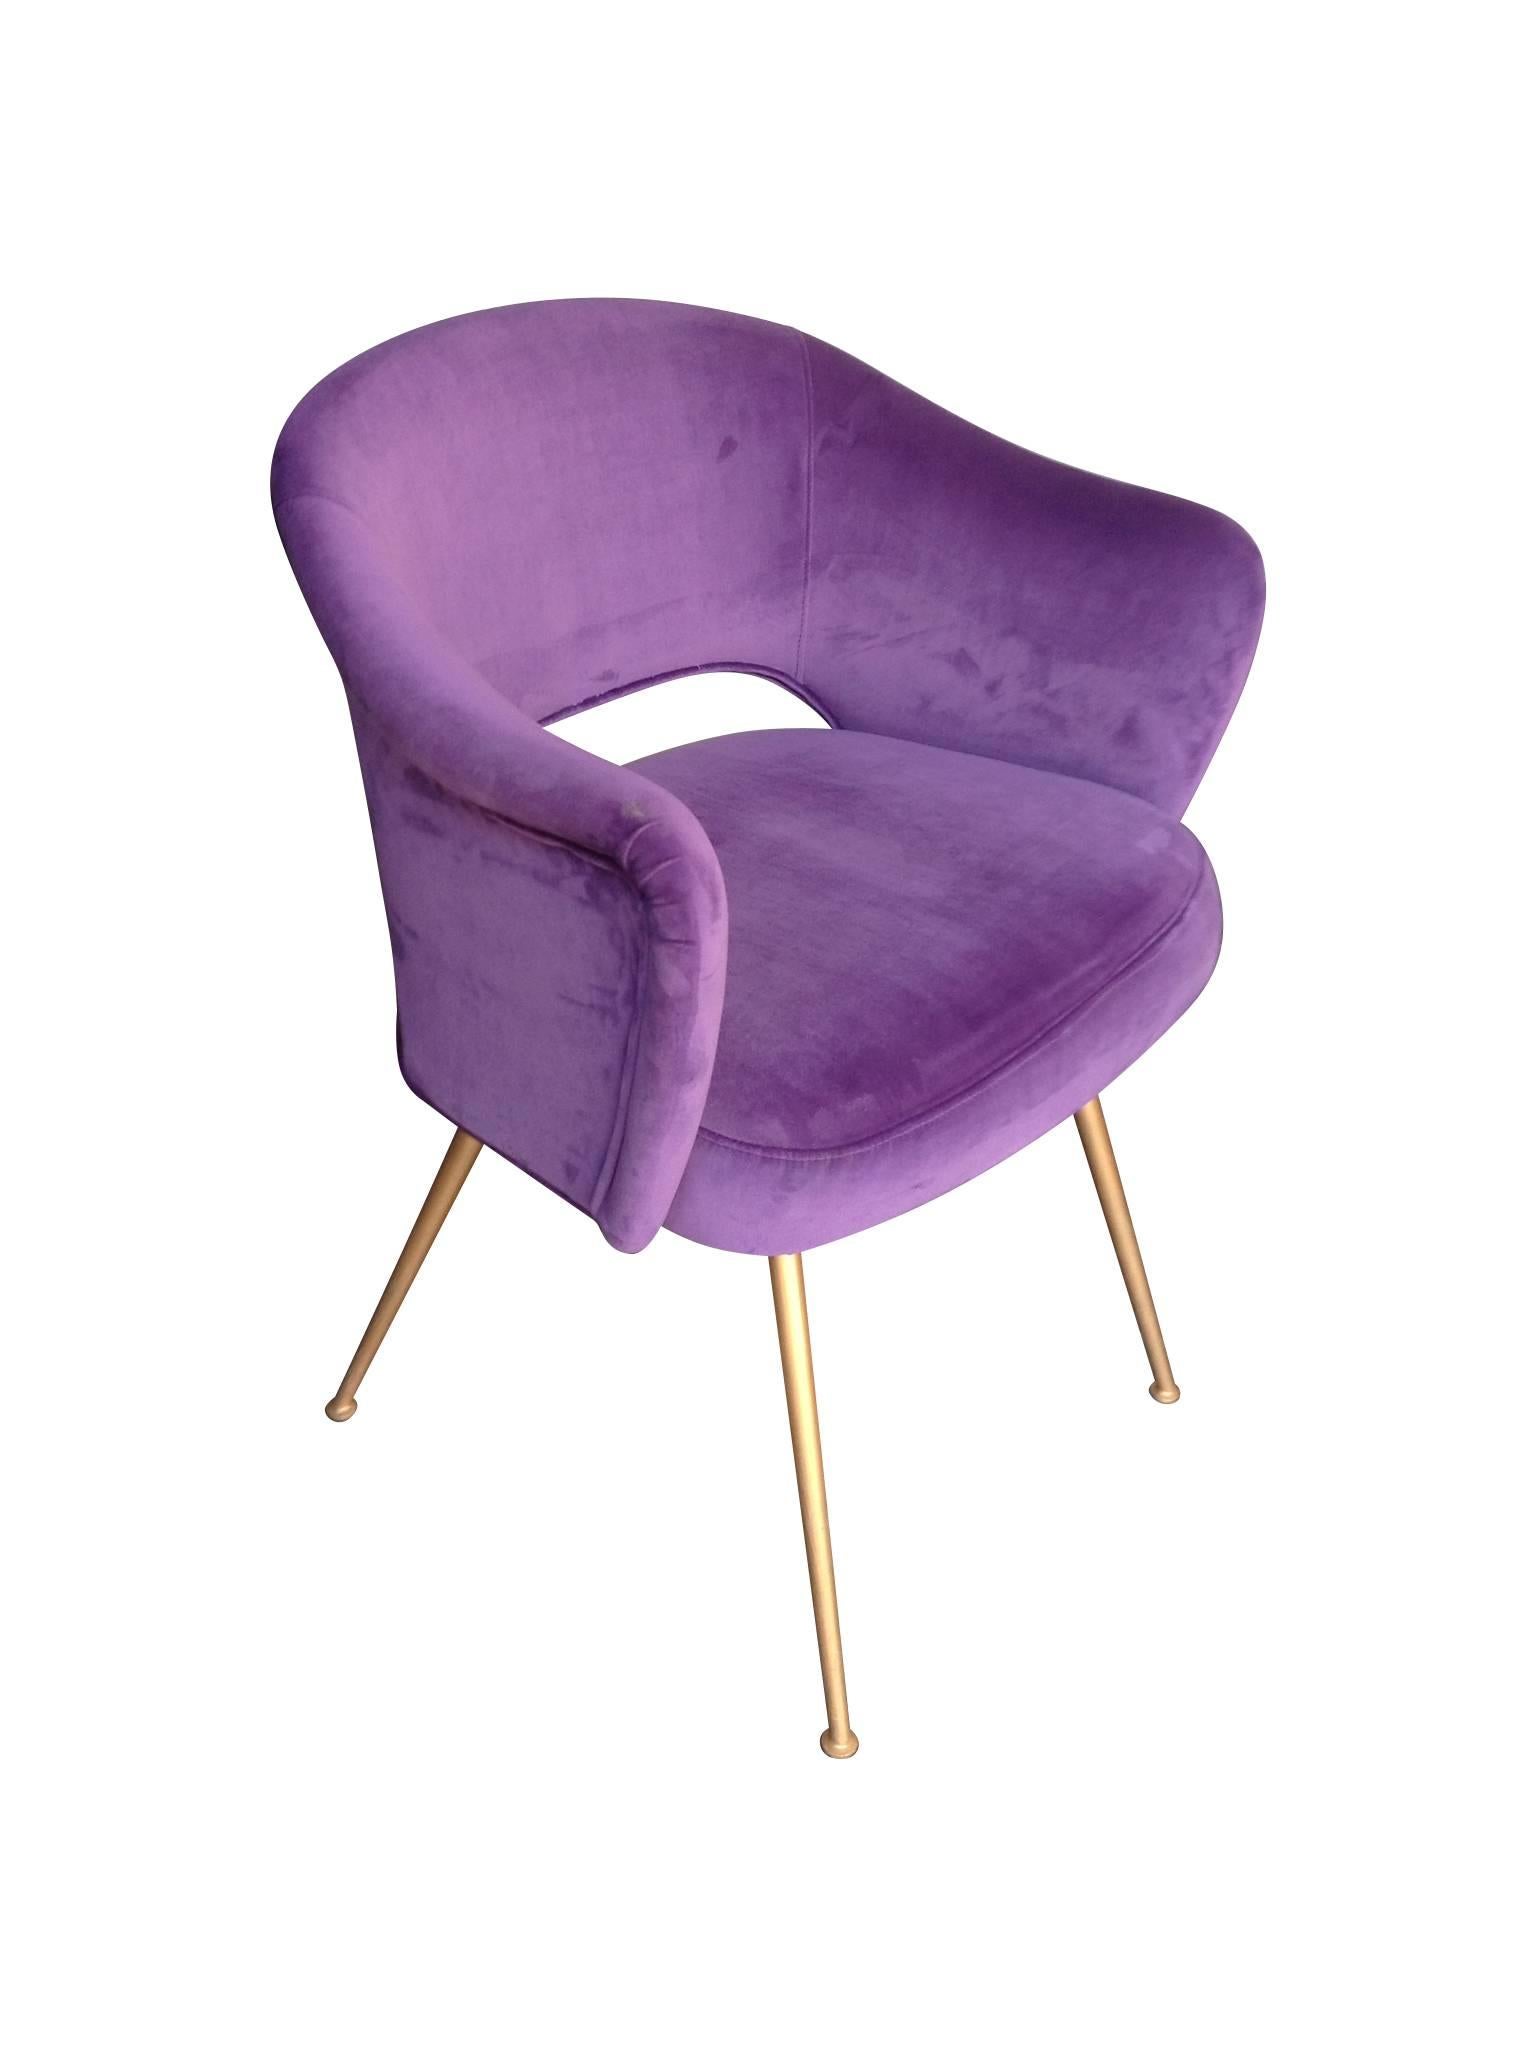 A pair of Italian cocktail chairs with gilt metal legs and re-upholstered n purple velvet. These chairs are extremely comfortable and would work as dining, office or bedroom chairs.